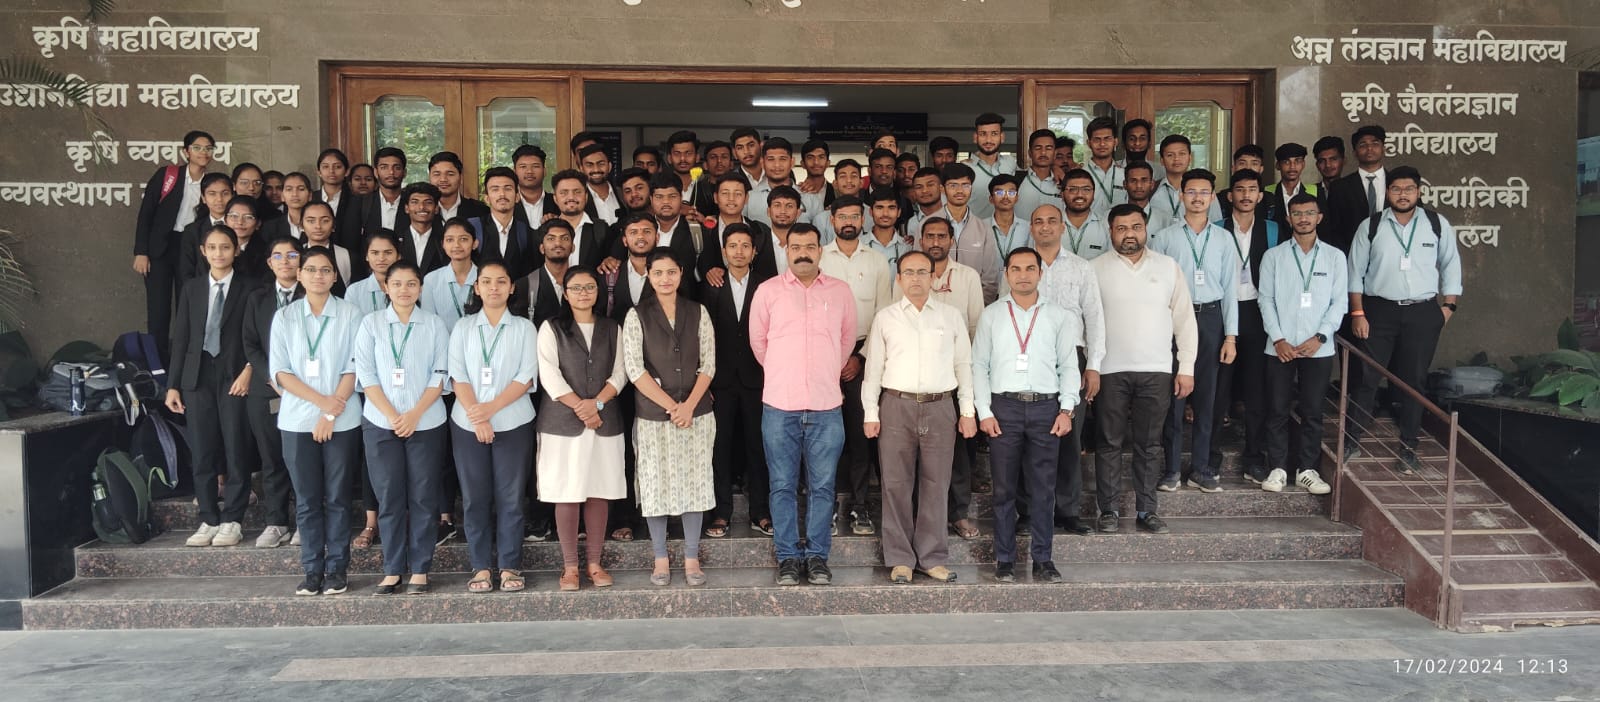 A Guest lecture on “Career Opportunity and Challenges in Agriculture Sector” Conducted by Dr. Amol Bhalerao, ARS Scientist, Agril Extension- TEC/VR/PUNE